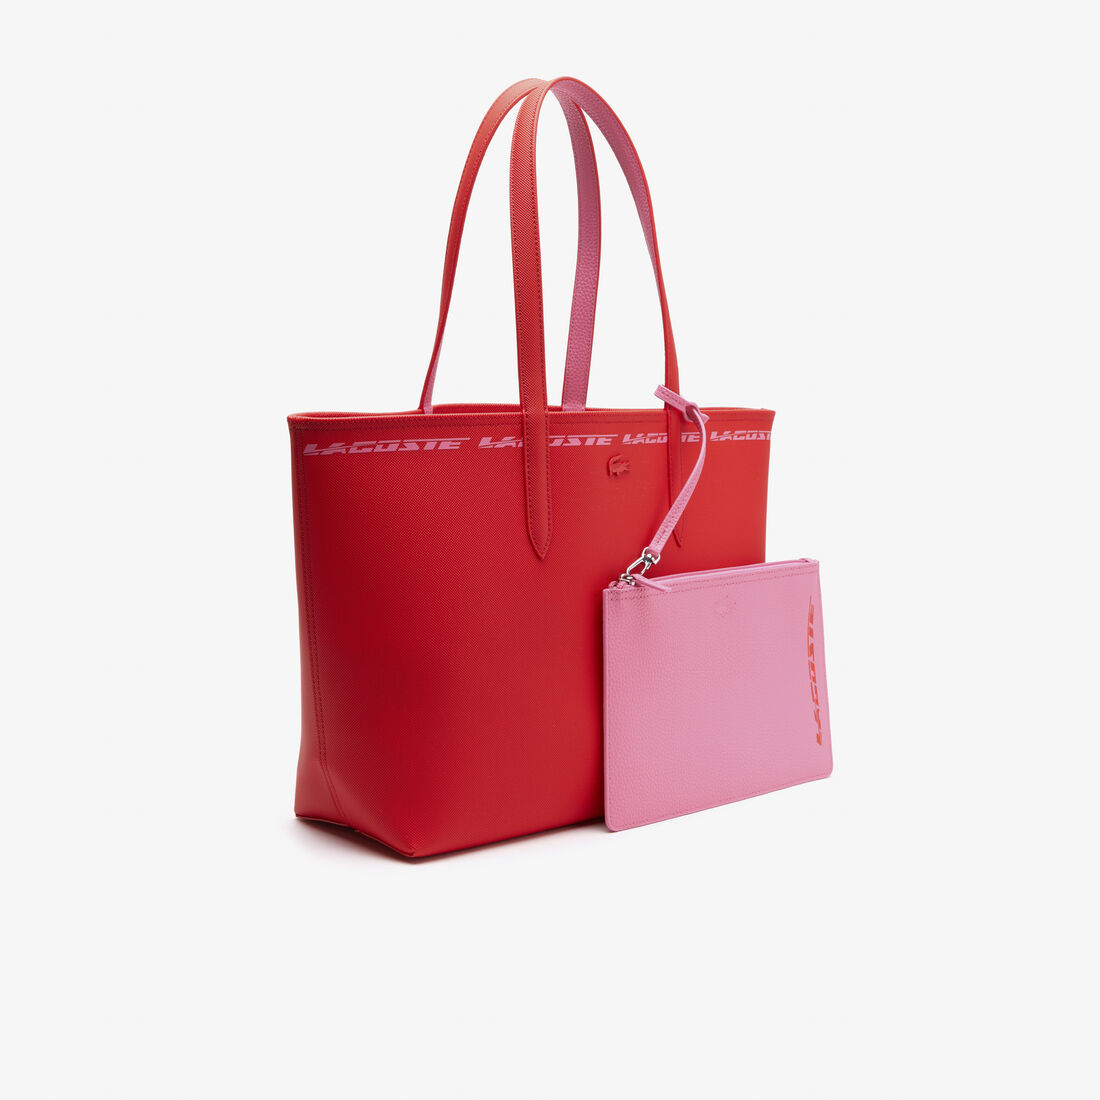 Lacoste Anna Reversible With Handtasche Damen Rot | KVUL-03175